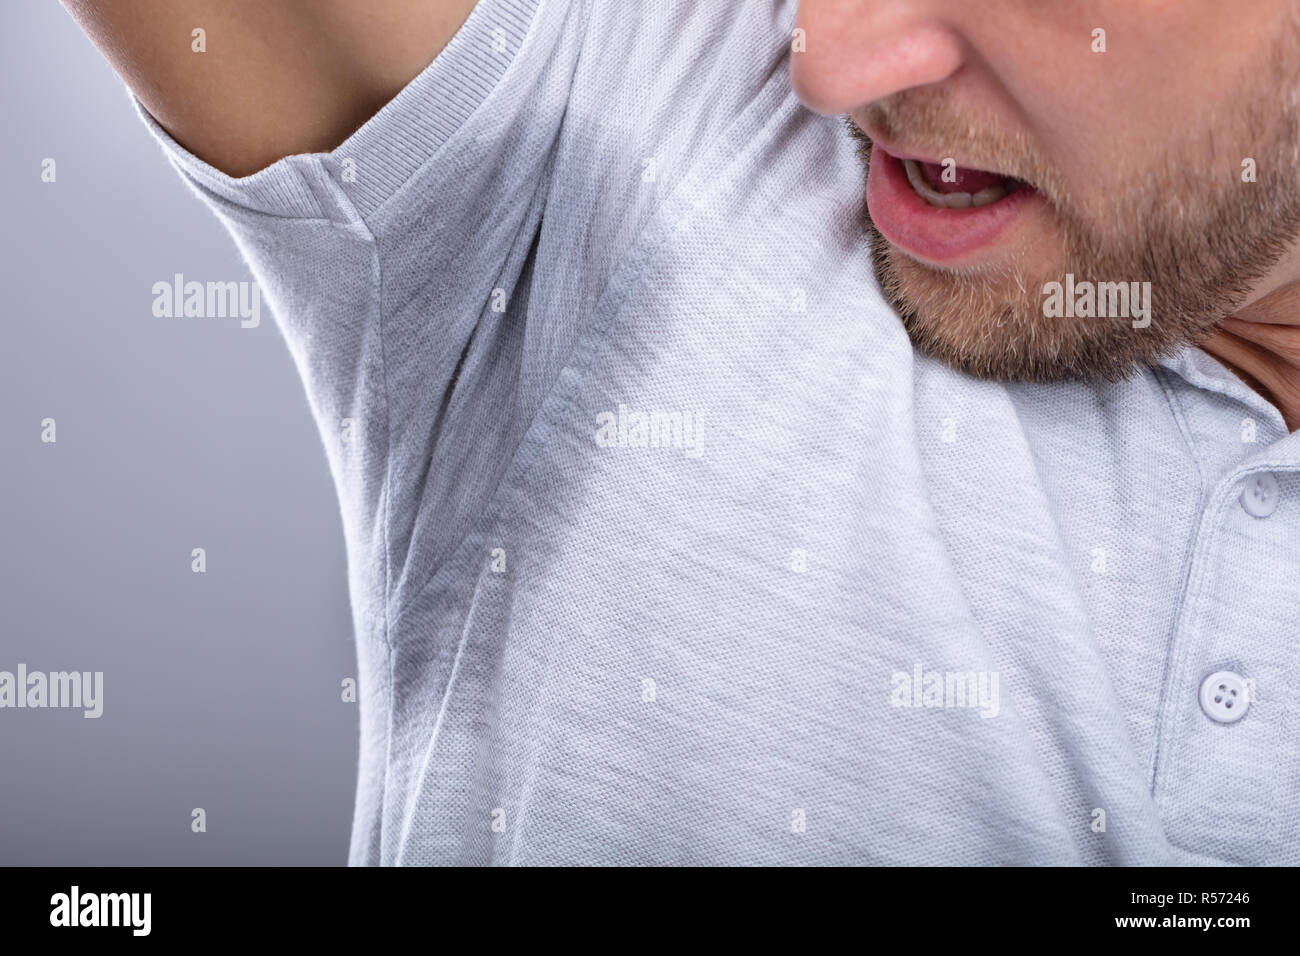 Close-up Of A Man In Grey T-shirt Looking At His Sweaty Armpit Stock Photo